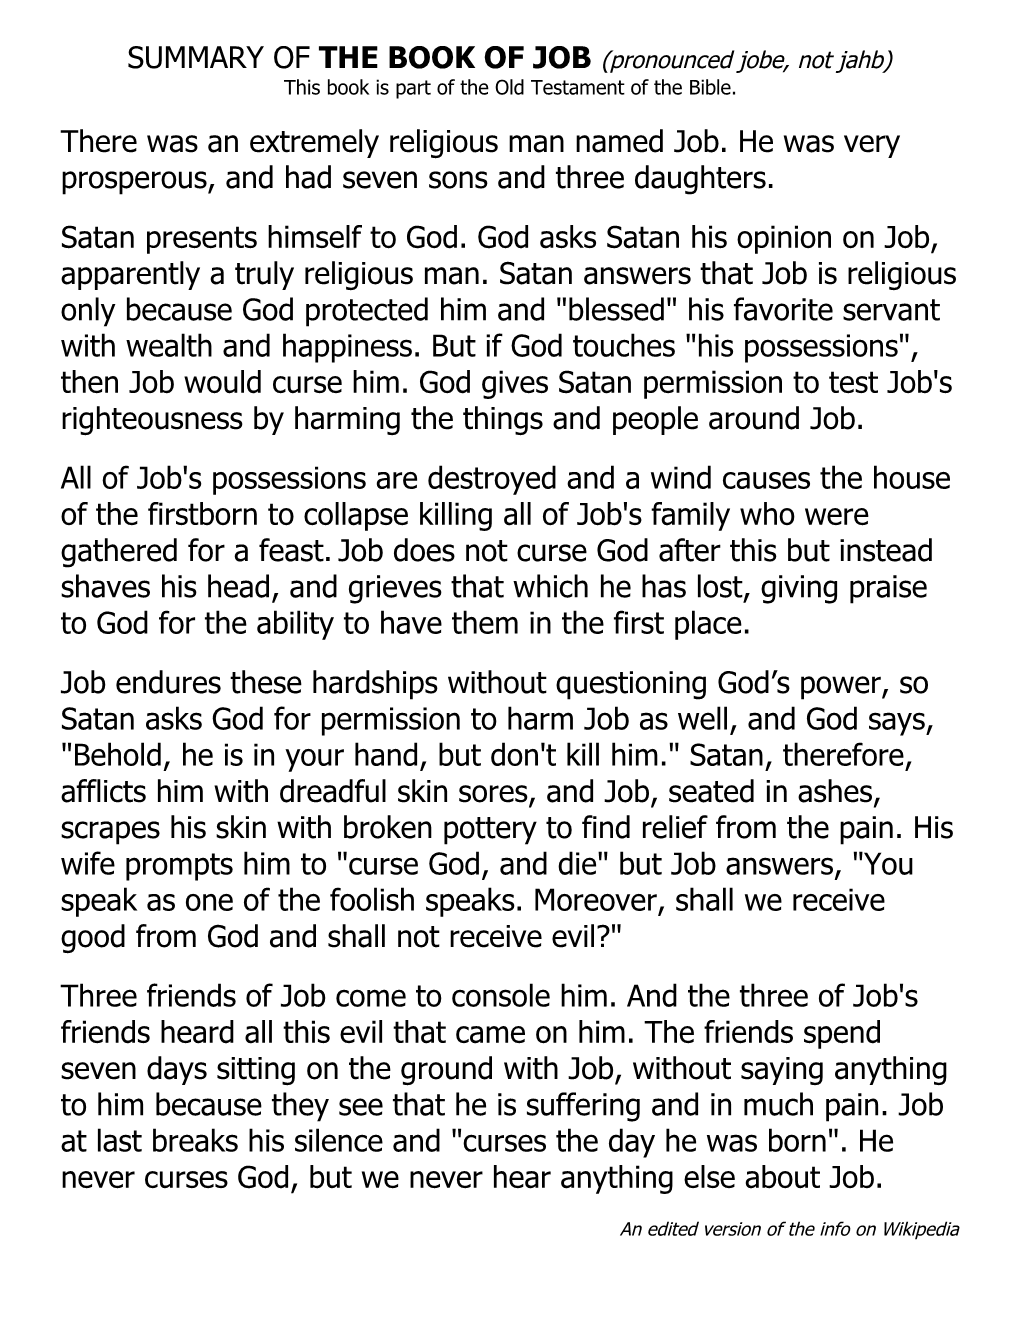 SUMMARY of the BOOK of JOB (Pronounced Jobe, Not Jahb) This Book Is Part of the Old Testament